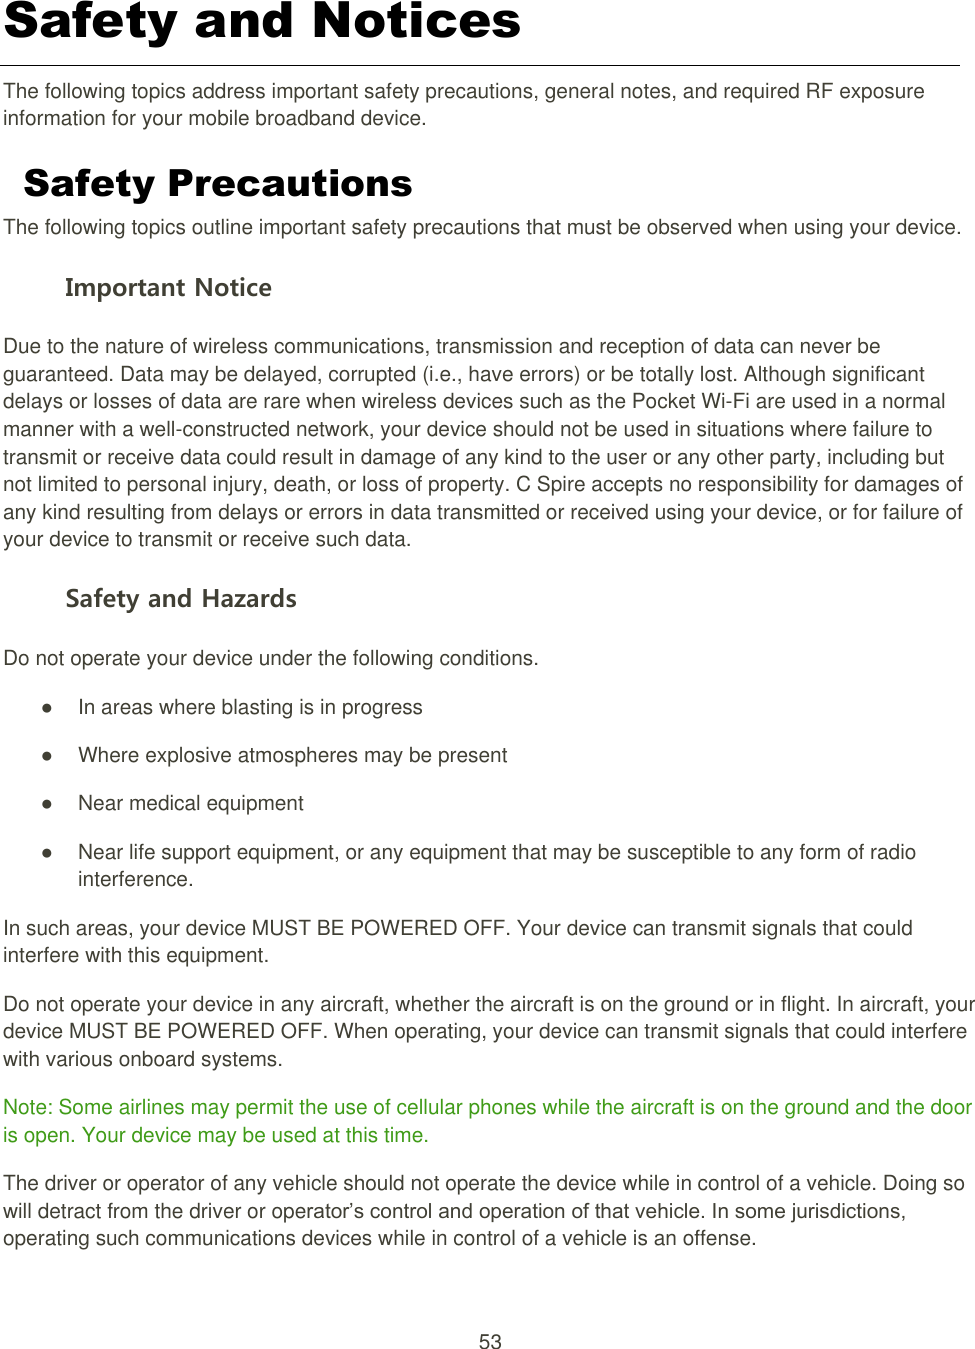 53  Safety and Notices   The following topics address important safety precautions, general notes, and required RF exposure information for your mobile broadband device. Safety Precautions   The following topics outline important safety precautions that must be observed when using your device. Important Notice Due to the nature of wireless communications, transmission and reception of data can never be guaranteed. Data may be delayed, corrupted (i.e., have errors) or be totally lost. Although significant delays or losses of data are rare when wireless devices such as the Pocket Wi-Fi are used in a normal manner with a well-constructed network, your device should not be used in situations where failure to transmit or receive data could result in damage of any kind to the user or any other party, including but not limited to personal injury, death, or loss of property. C Spire accepts no responsibility for damages of any kind resulting from delays or errors in data transmitted or received using your device, or for failure of your device to transmit or receive such data. Safety and Hazards Do not operate your device under the following conditions.   ●  In areas where blasting is in progress   ●  Where explosive atmospheres may be present   ●  Near medical equipment   ●  Near life support equipment, or any equipment that may be susceptible to any form of radio interference.   In such areas, your device MUST BE POWERED OFF. Your device can transmit signals that could interfere with this equipment. Do not operate your device in any aircraft, whether the aircraft is on the ground or in flight. In aircraft, your device MUST BE POWERED OFF. When operating, your device can transmit signals that could interfere with various onboard systems. Note: Some airlines may permit the use of cellular phones while the aircraft is on the ground and the door is open. Your device may be used at this time. The driver or operator of any vehicle should not operate the device while in control of a vehicle. Doing so will detract from the driver or operator’s control and operation of that vehicle. In some jurisdictions, operating such communications devices while in control of a vehicle is an offense. 